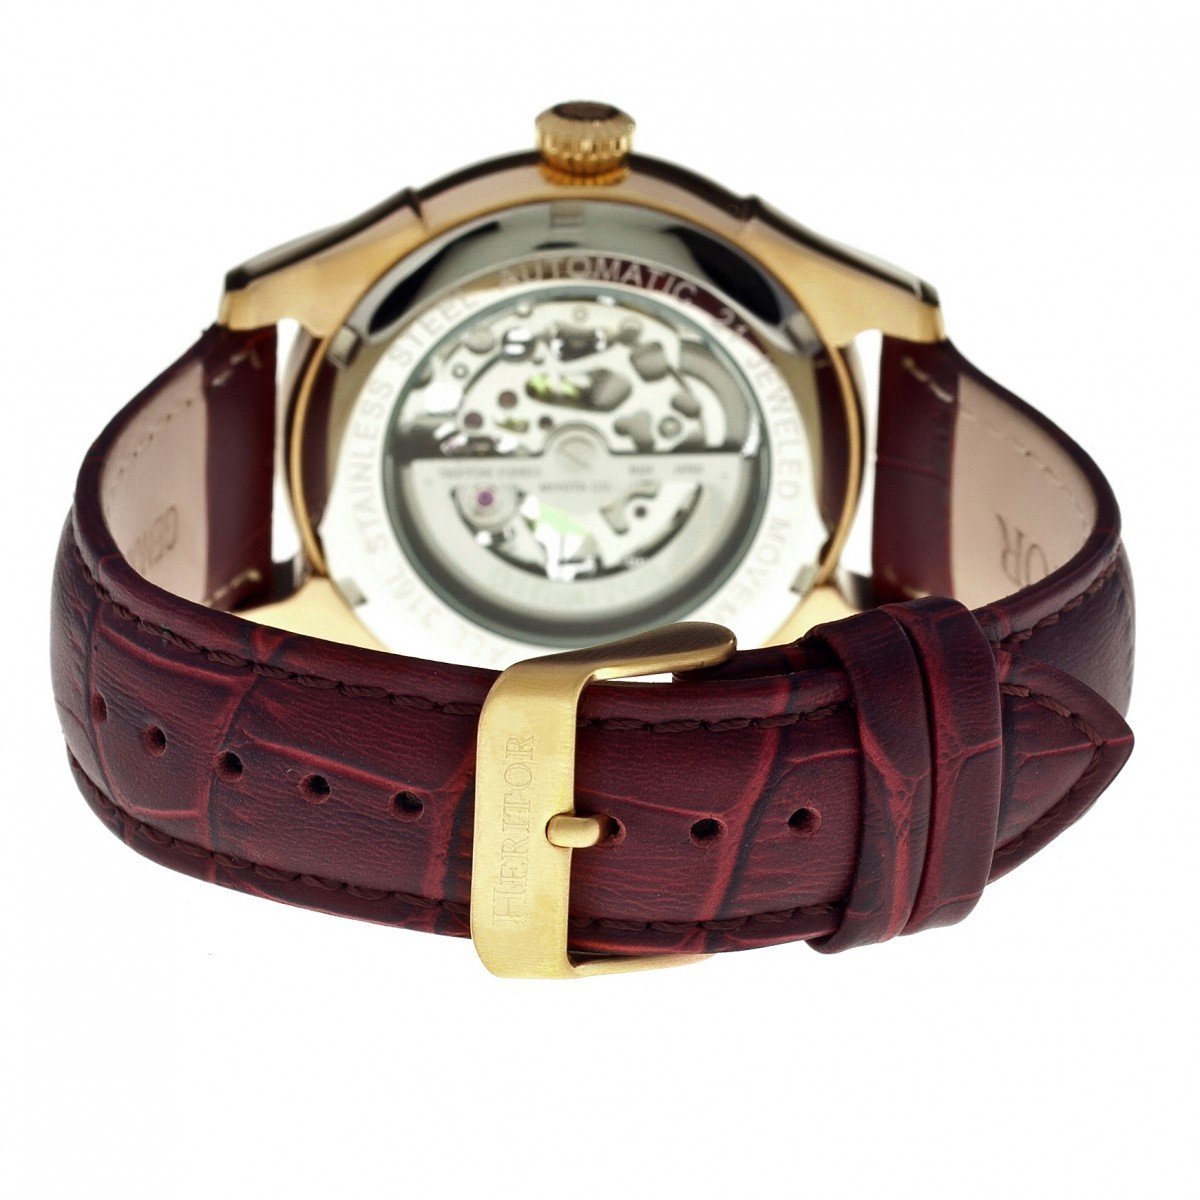 Heritor Automatic Nicollier Skeleton Leather-Band Watch - Gold/Brown - HERHR1904